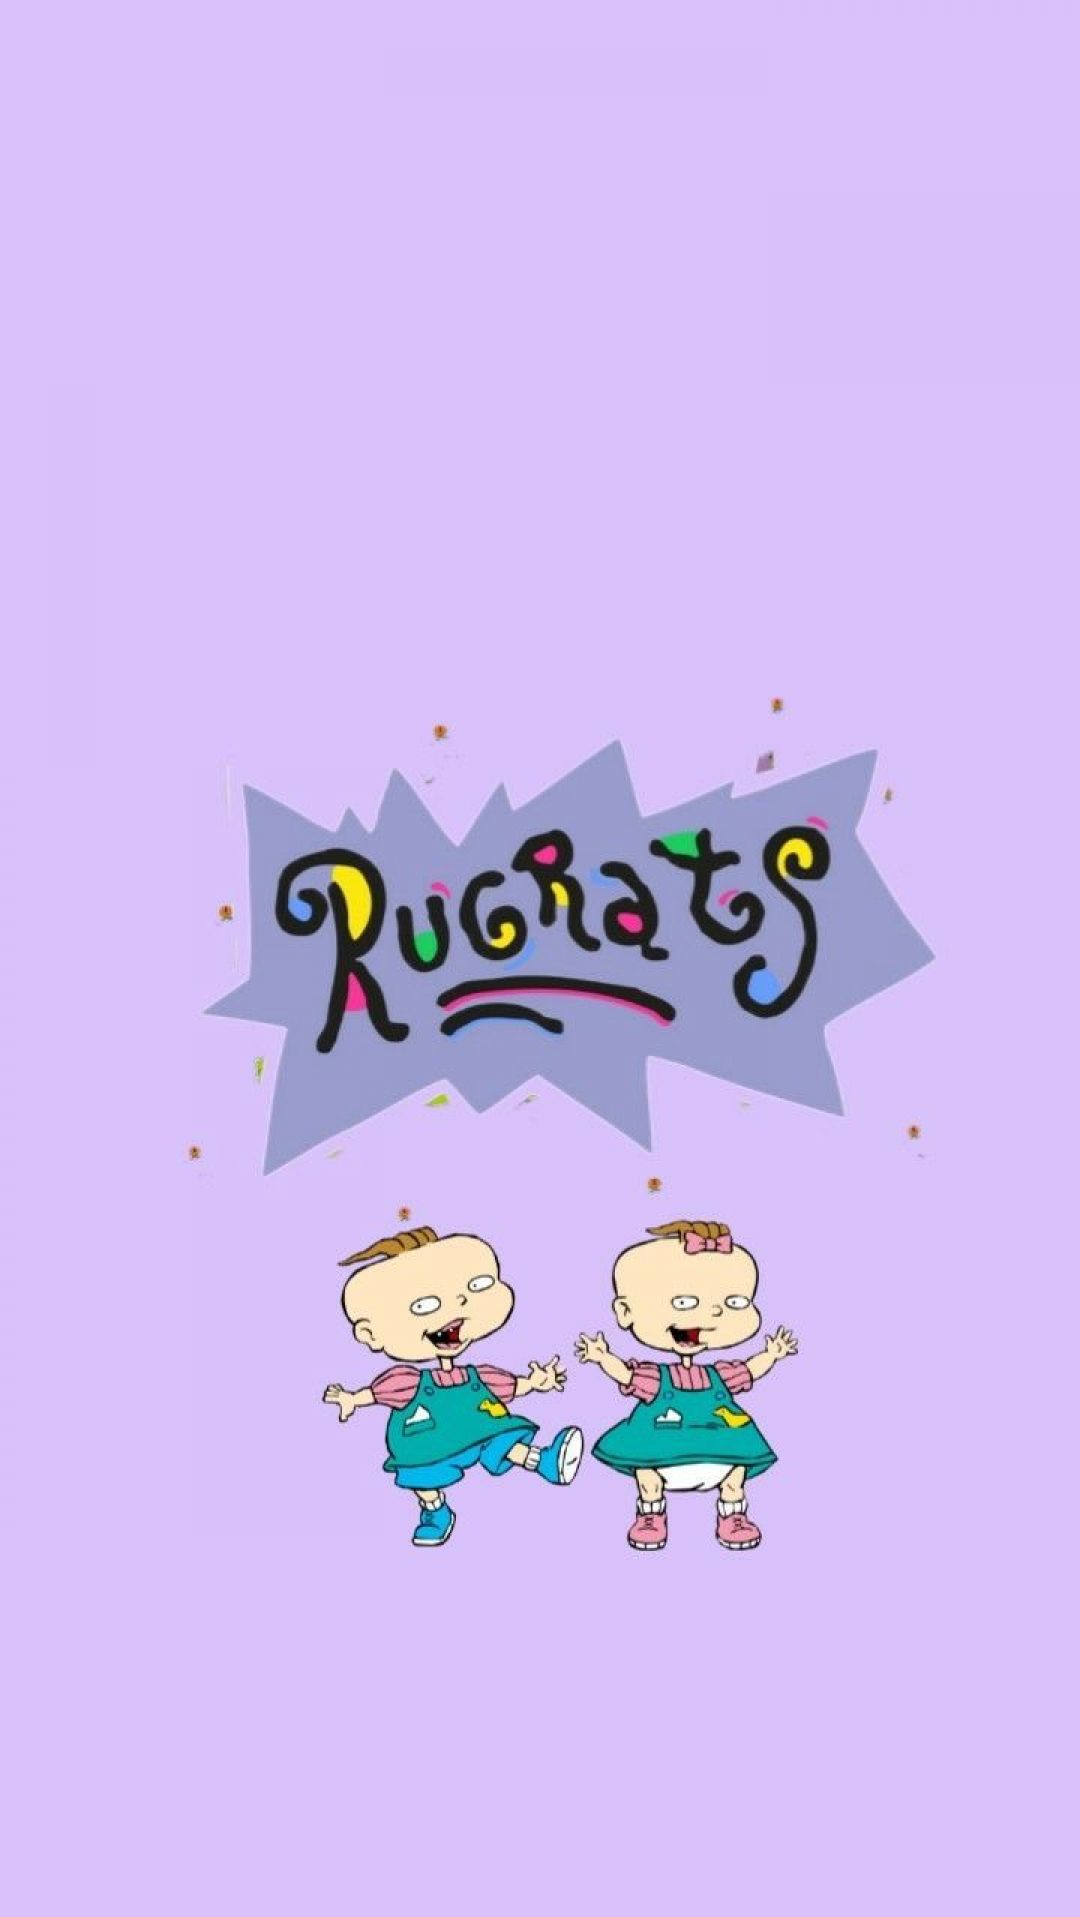 ✓[140+] Rugrats in 2019. iPhone wallpaper tumblr aesthetic, Cartoon -  Android / iPhone HD Wallpaper Background Download (png / jpg) (2023)